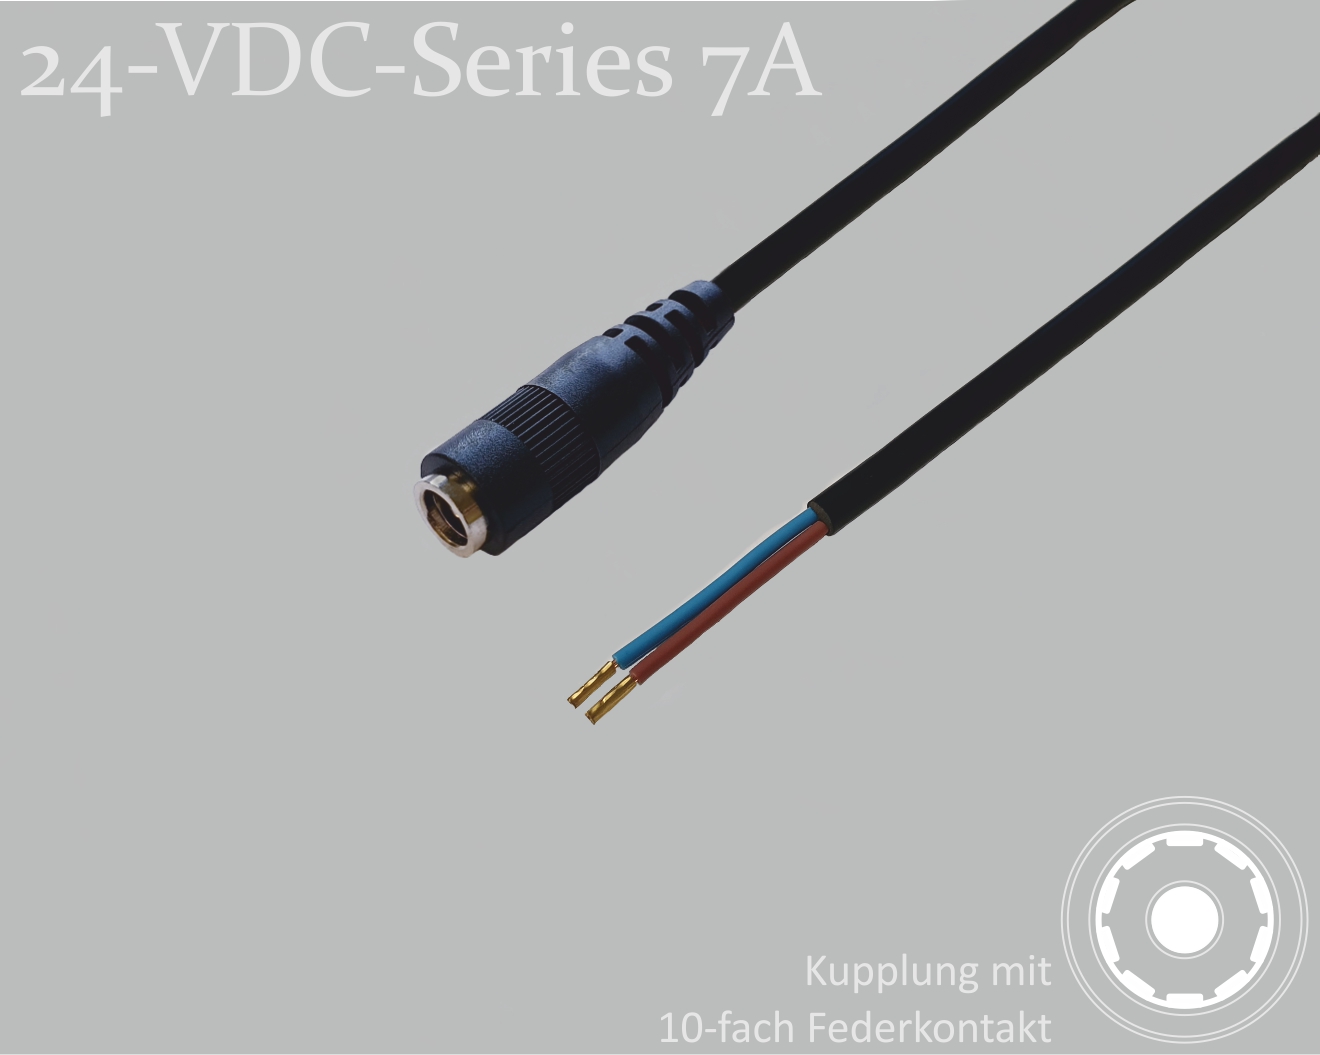 24-VDC-Series 7A, DC connection cable, DC coupling with 10-spring contact 2.5x5.5mm, round cable 2x0.50mm², black, wire end sleeves, 0.75m